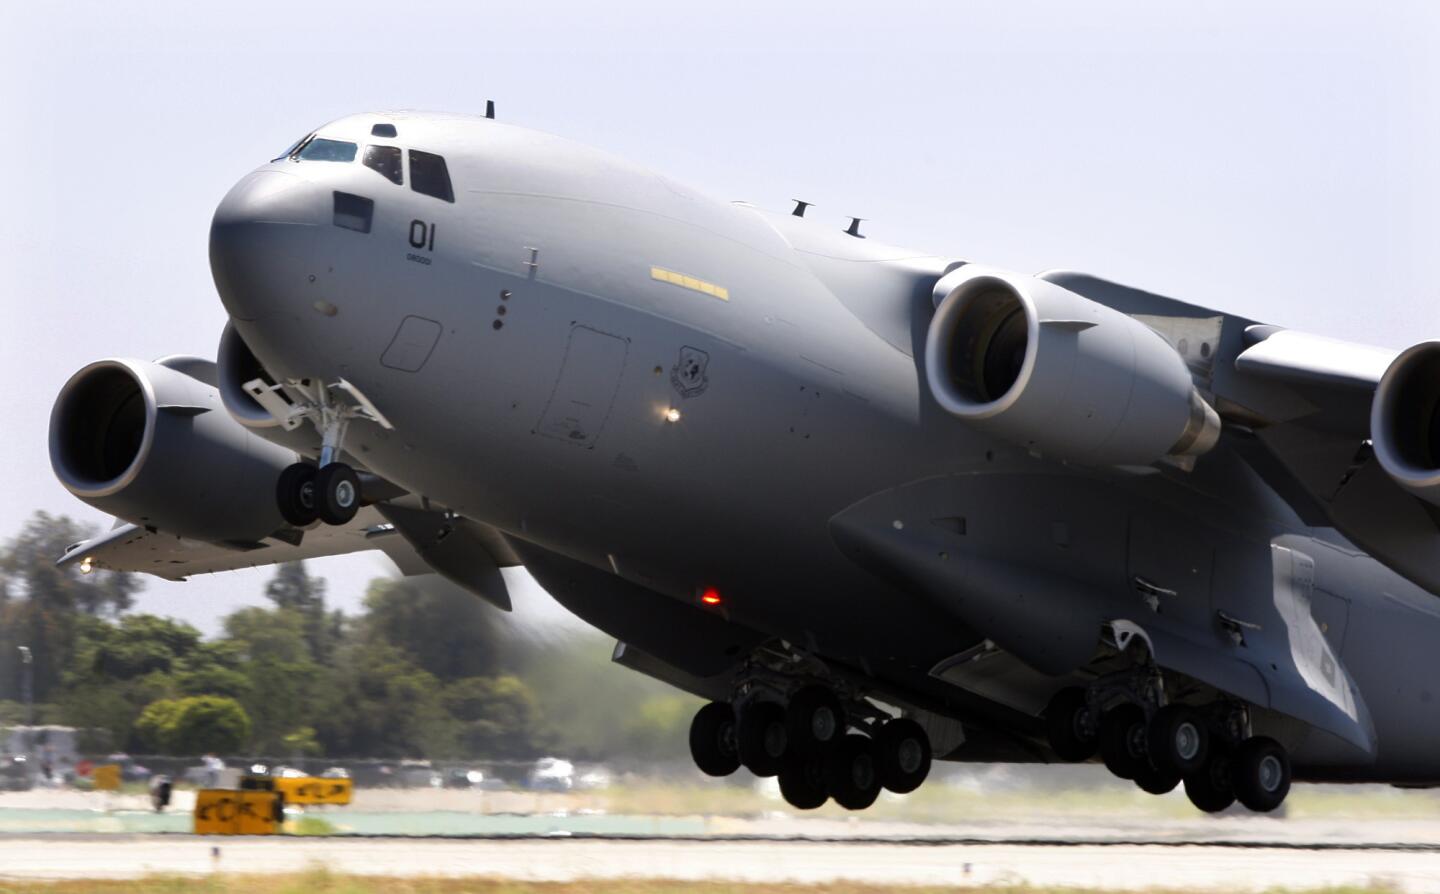 A Boeing C-17 Globemaster III takes off from Long Beach Airport en route to Hungary, part of the 12-nation Strategic Airlift. The Globemaster is designed for military and humanitarian airlifts.